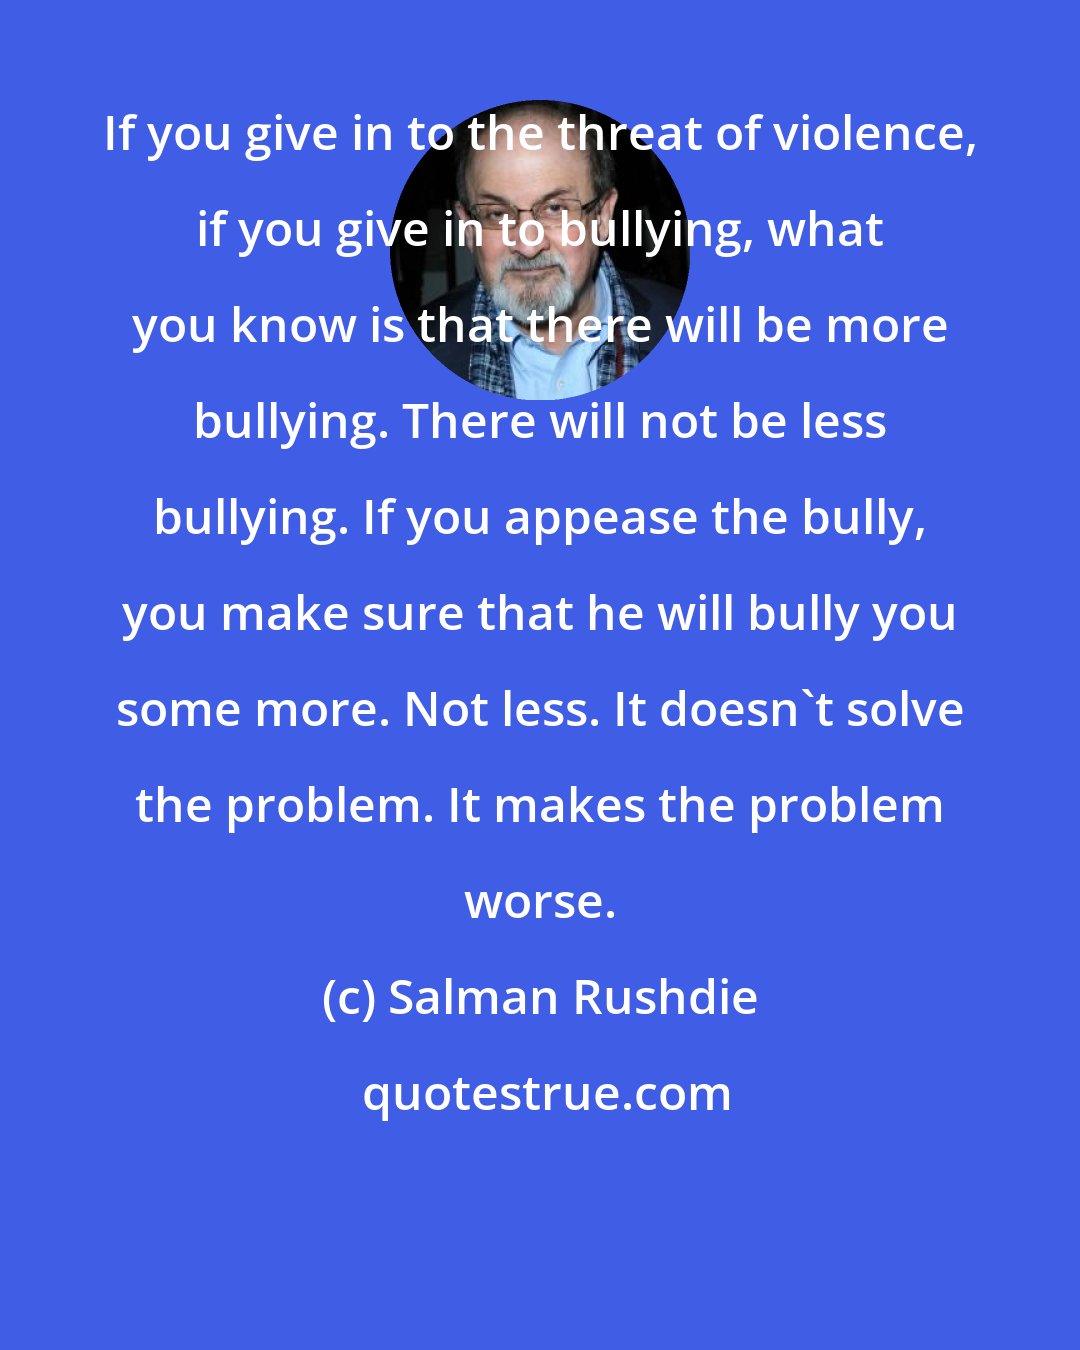 Salman Rushdie: If you give in to the threat of violence, if you give in to bullying, what you know is that there will be more bullying. There will not be less bullying. If you appease the bully, you make sure that he will bully you some more. Not less. It doesn't solve the problem. It makes the problem worse.